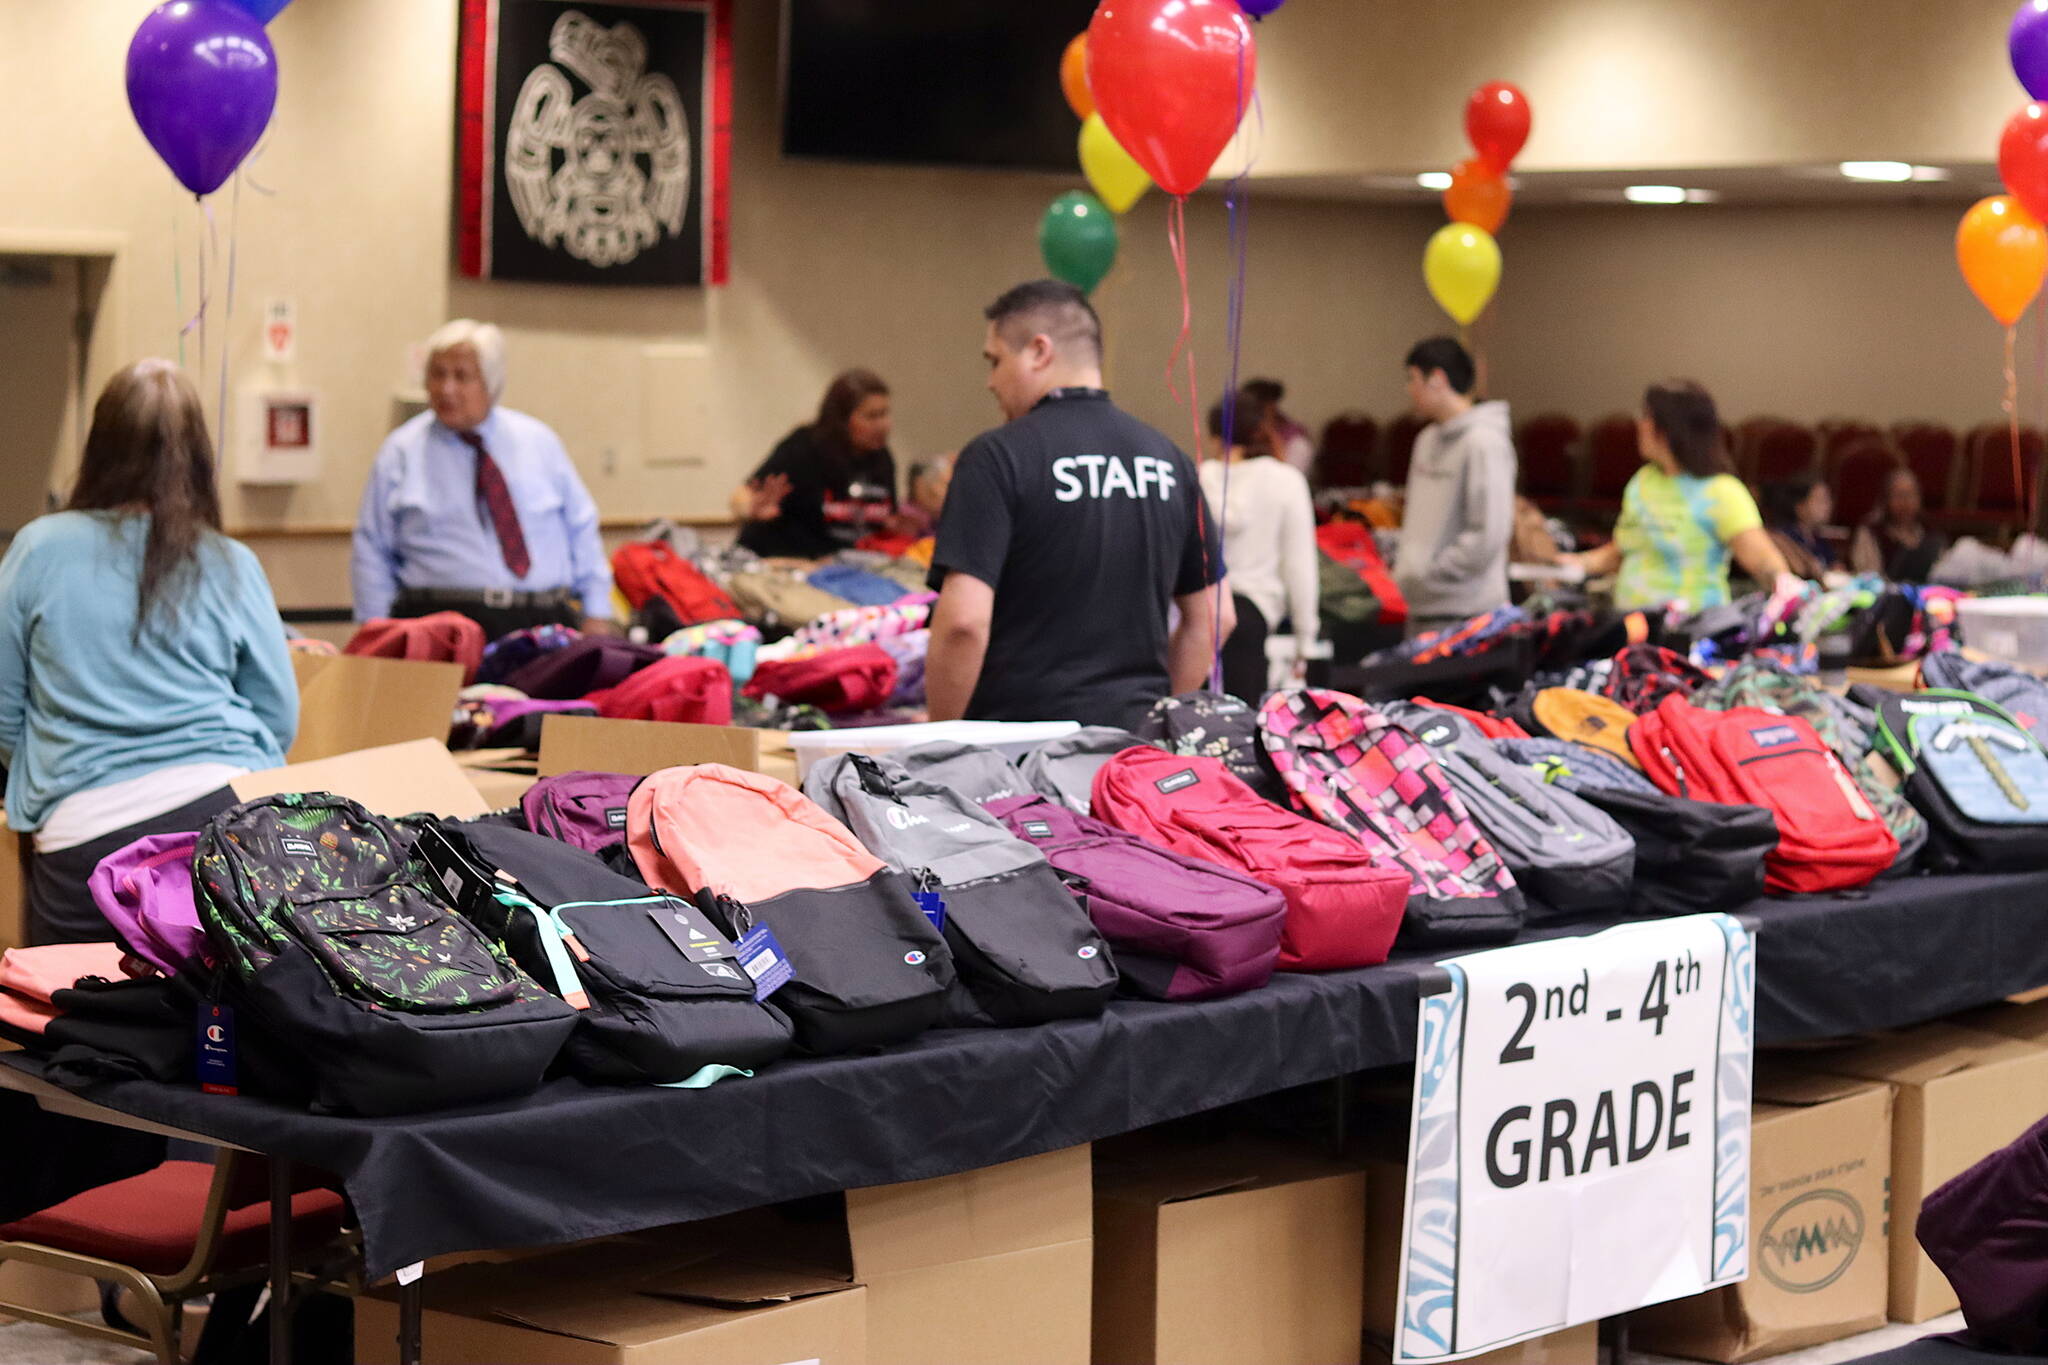 Backpacks designated for specific grade levels are shown on tables at Elizabeth Peratrovich Hall during the Central Council of the Tlingit and Haida Indian Tribes of Alaska’s annual backpack distribution Saturday. (Mark Sabbatini / Juneau Empire)